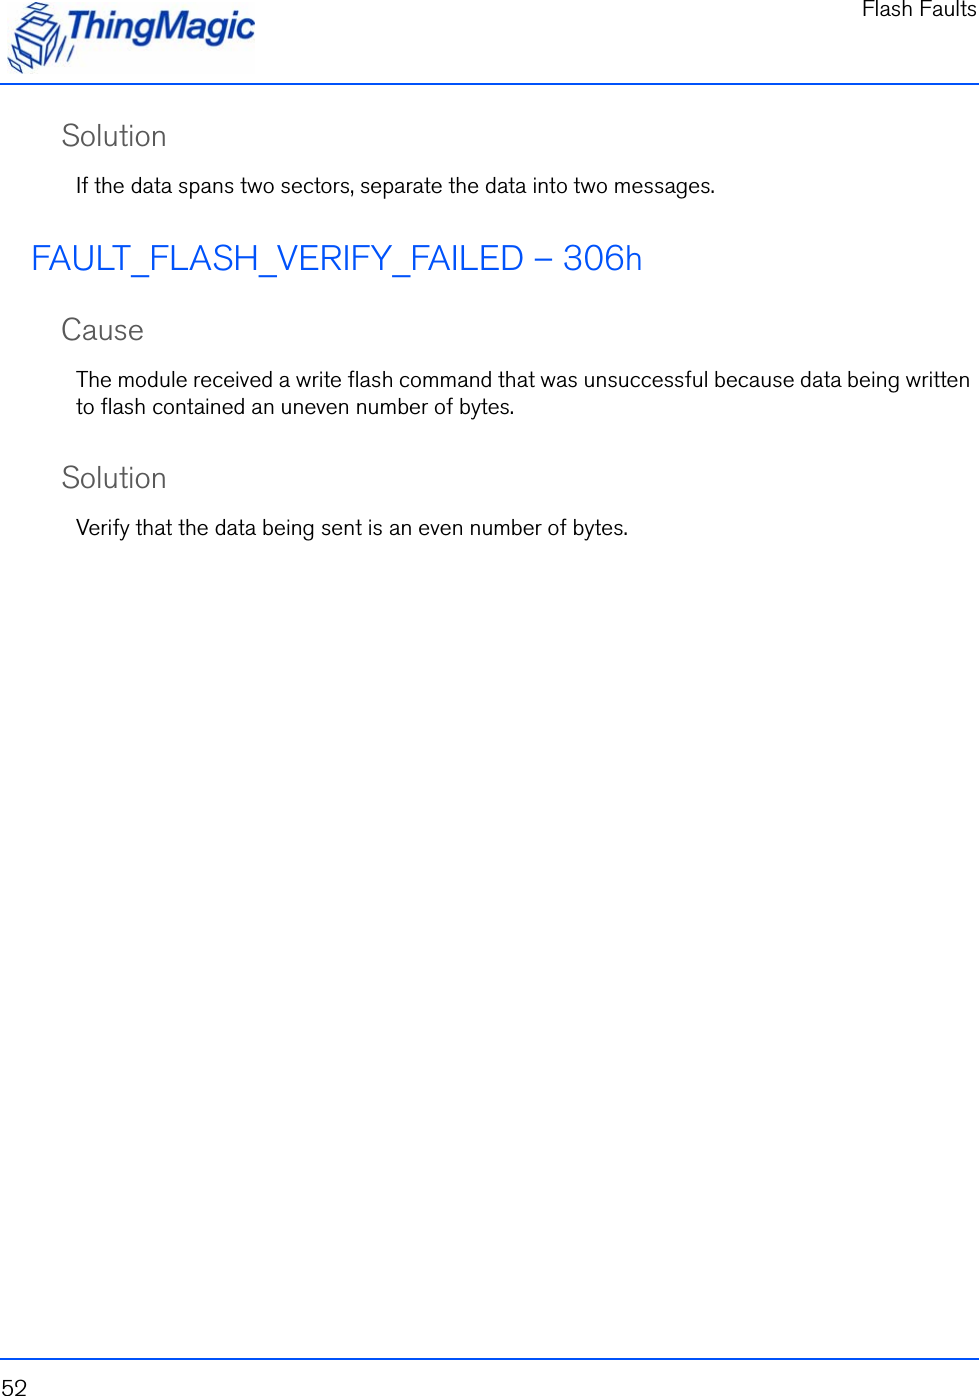 Flash Faults52SolutionIf the data spans two sectors, separate the data into two messages.FAULT_FLASH_VERIFY_FAILED – 306hCauseThe module received a write flash command that was unsuccessful because data being written to flash contained an uneven number of bytes.SolutionVerify that the data being sent is an even number of bytes.